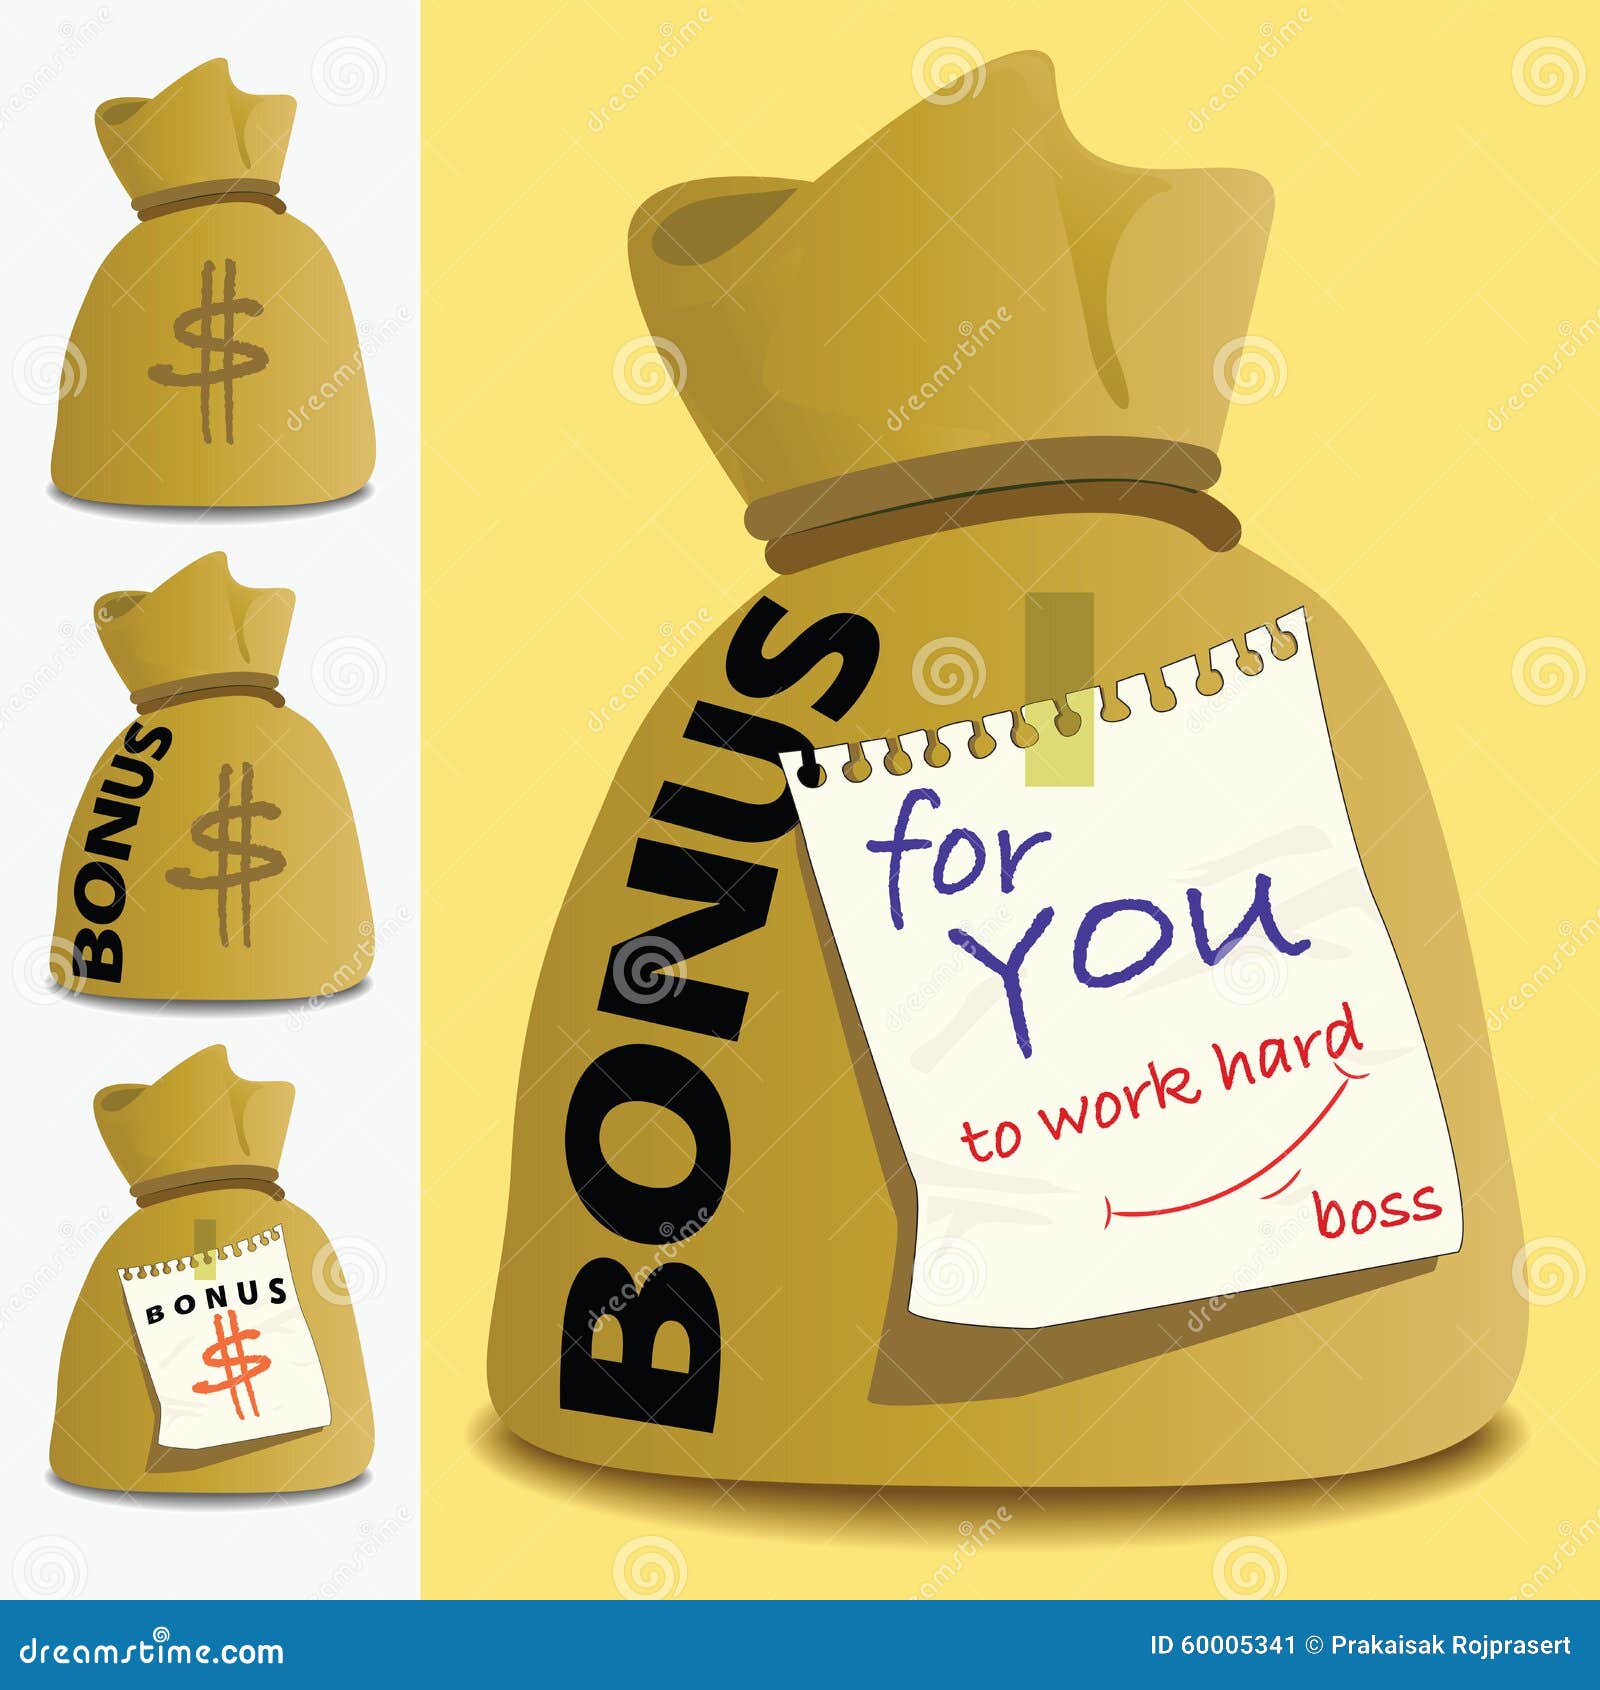 Coin Bag PNG Picture, Coin Financial Bag Rich Bonus, Gift, Financial  Income, Business Poster PNG Image For Free Download